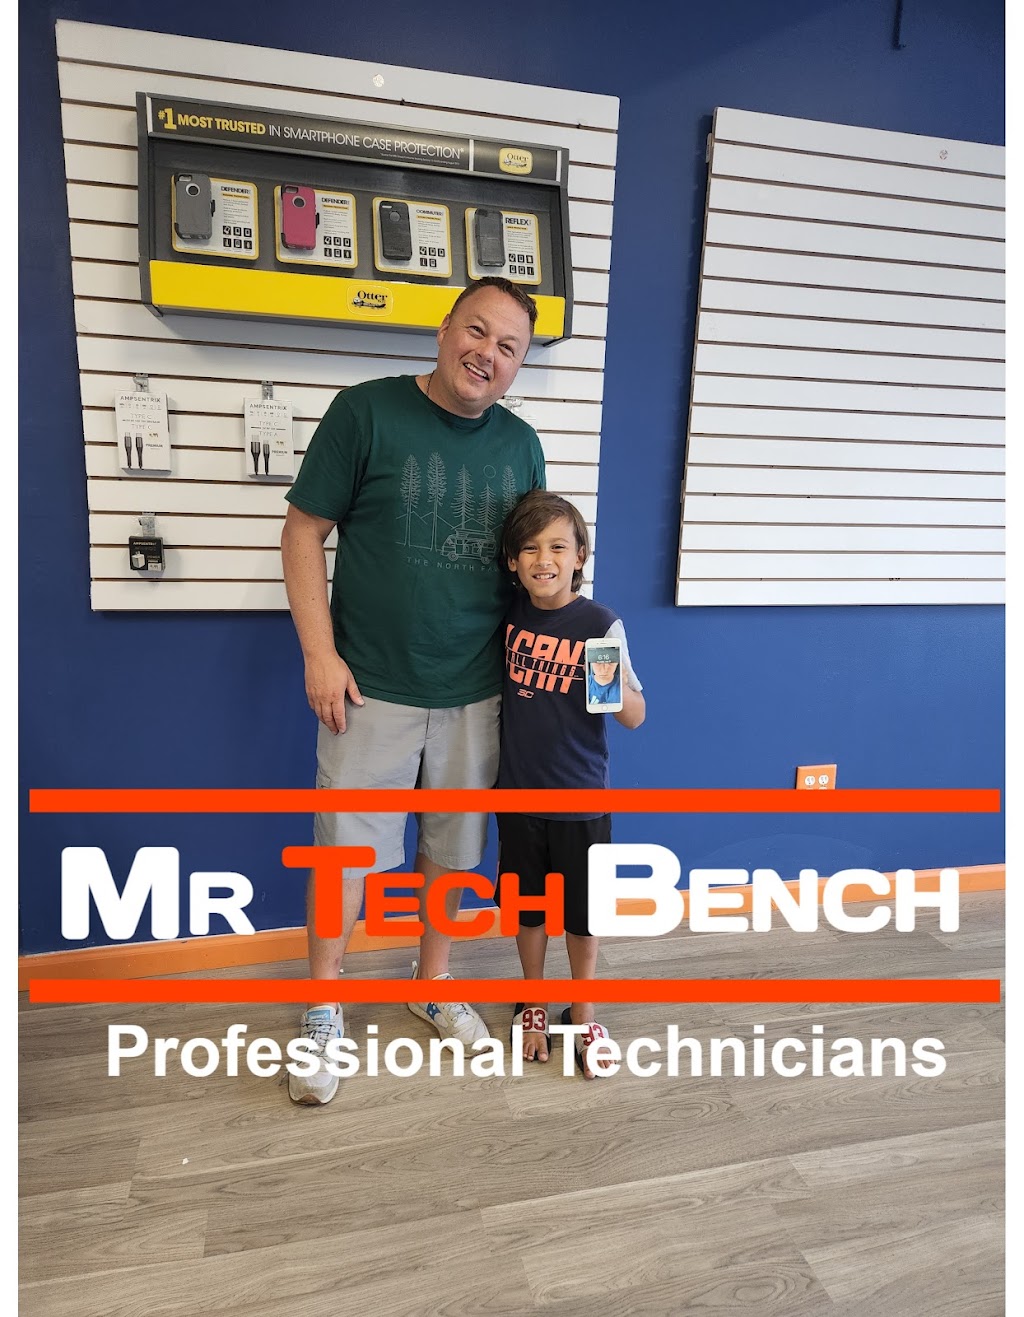 Mr Tech Bench Holbrook - Computer and Phone Repair | 310 Main St, Holbrook, NY 11741 | Phone: (631) 935-0800